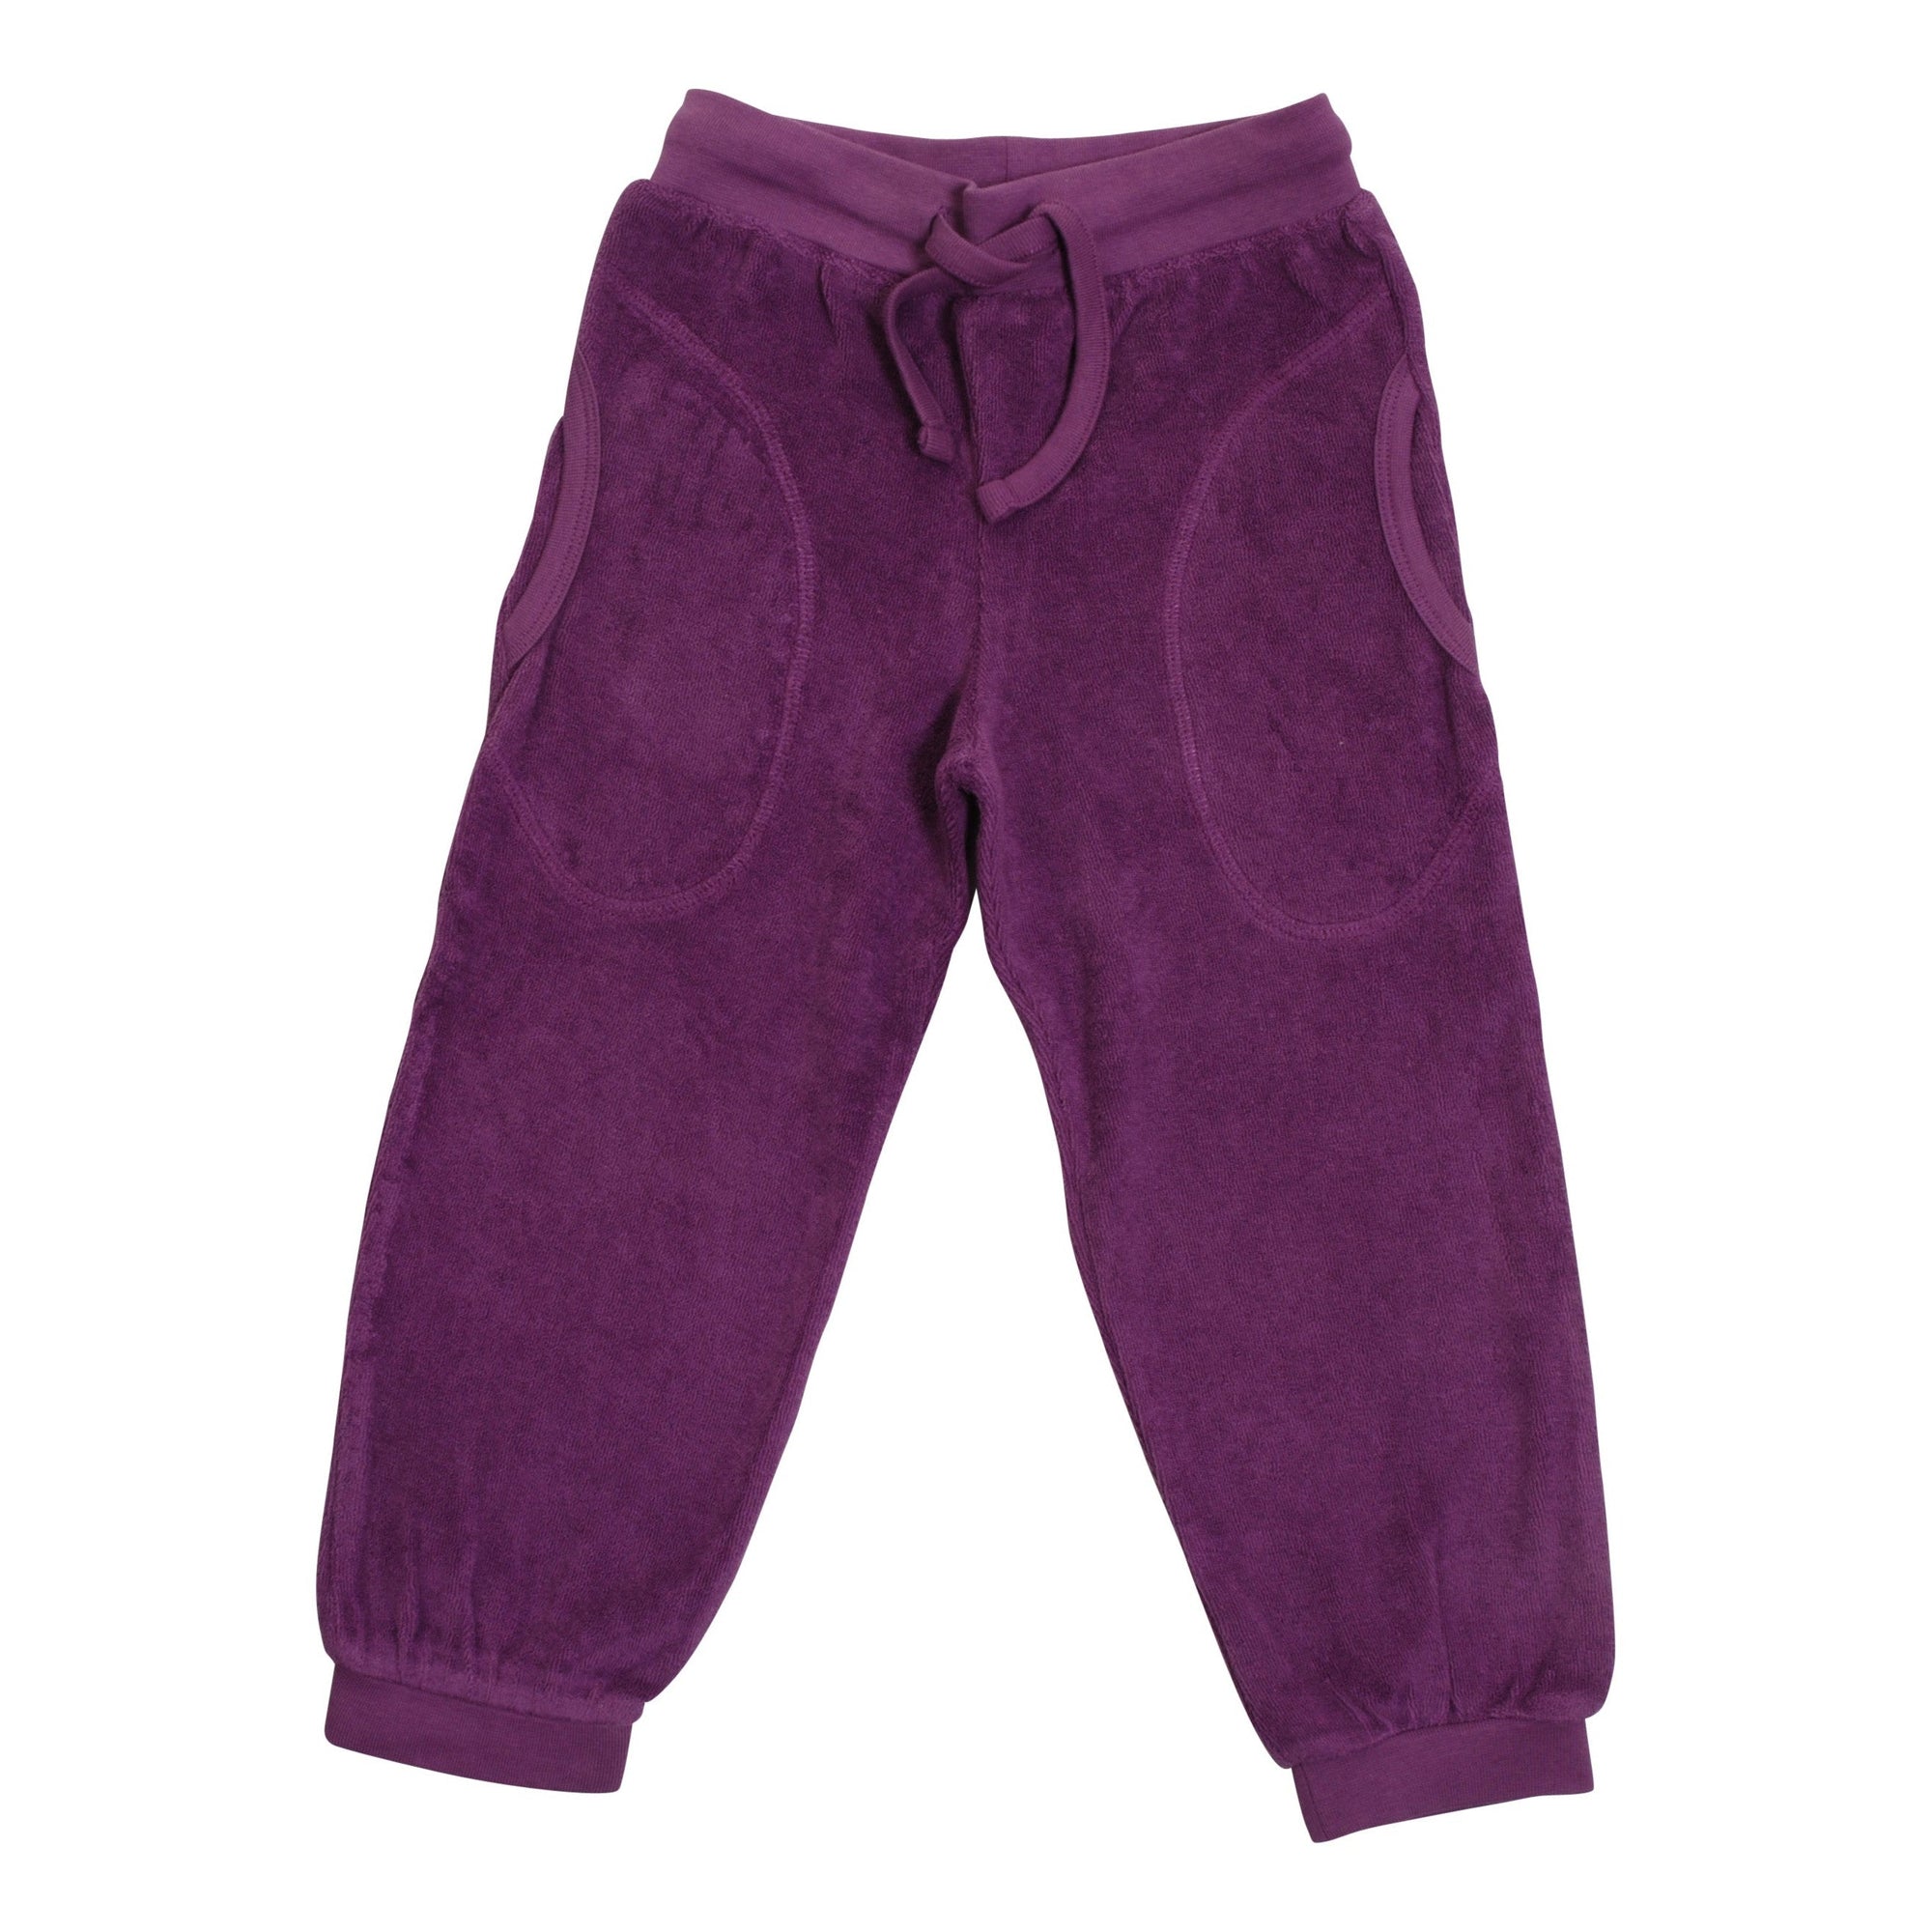 Amethyst Orchid Terry Trousers - 1 Left Size 4-5 years-Duns Sweden-Modern Rascals